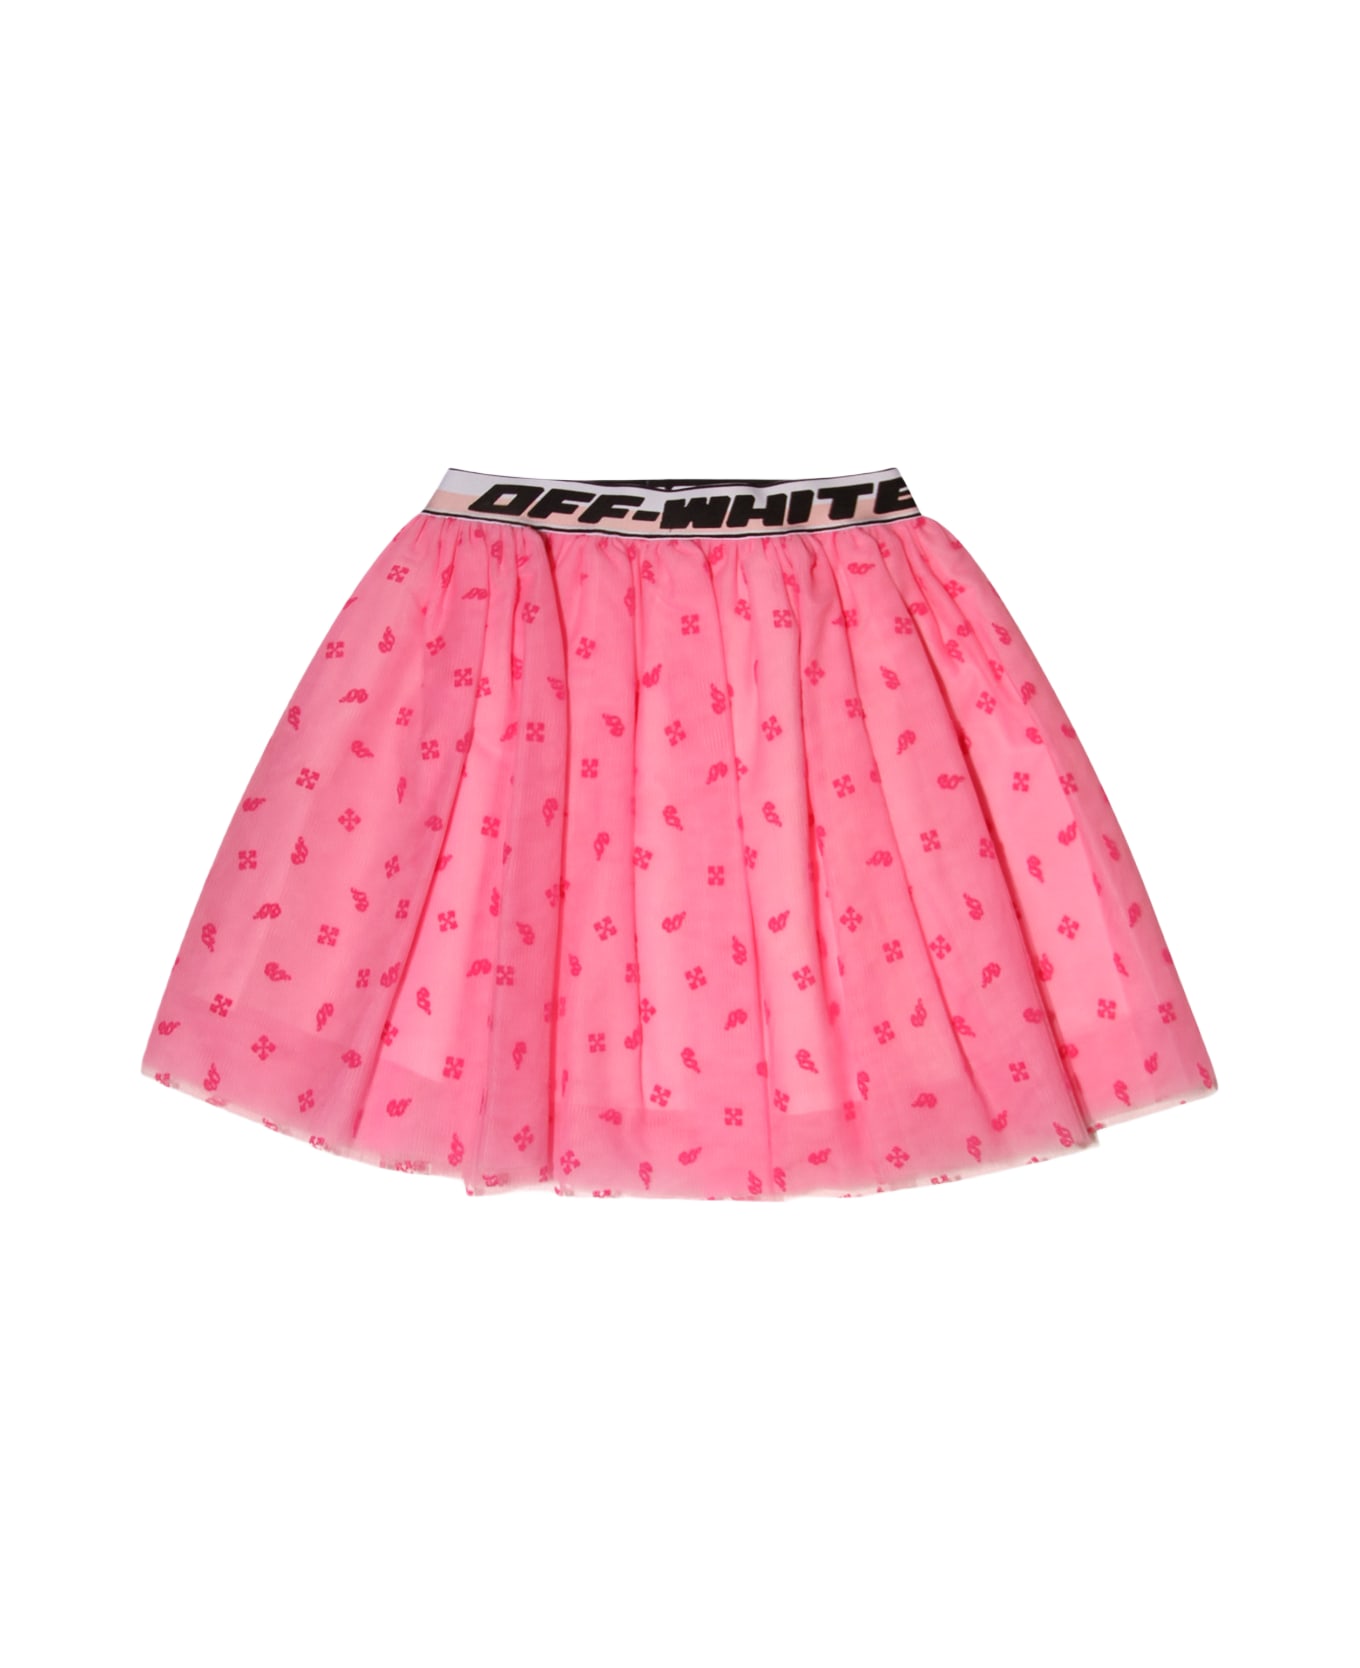 Off-White Pink And Black Tulle Skirt - PINK/BLACK ボトムス